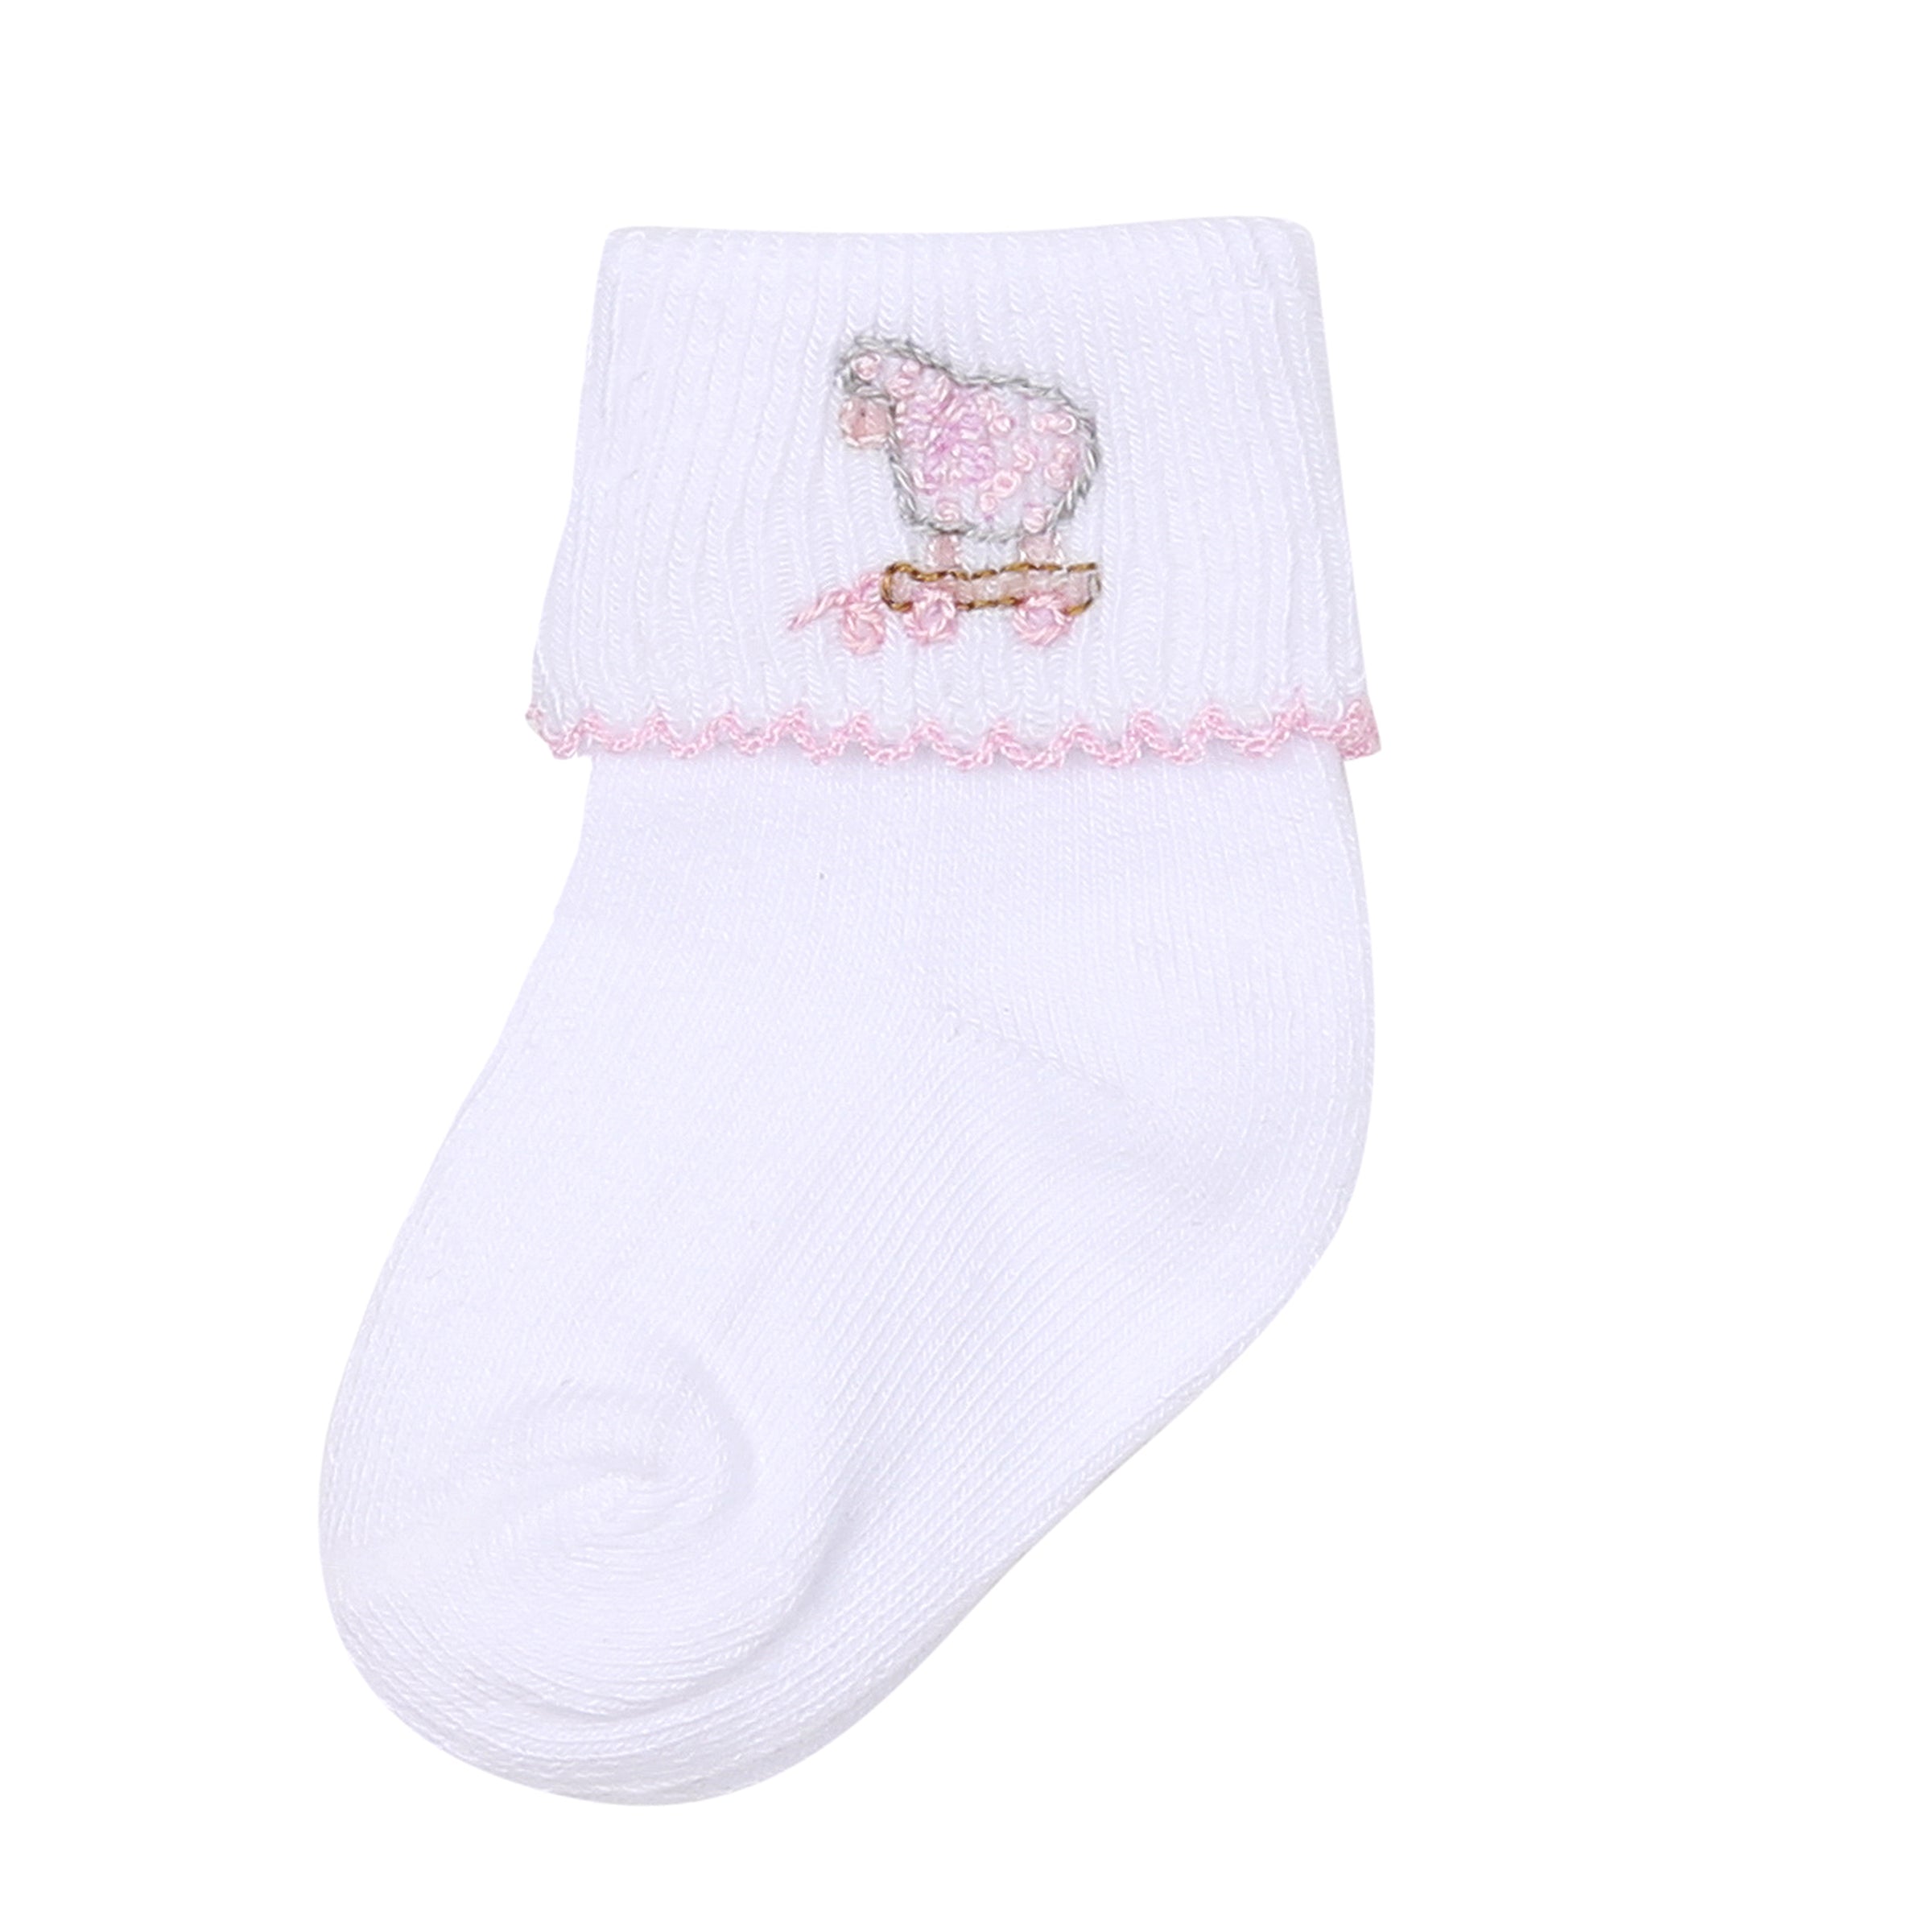 Darling Lambs Embroidered Socks - Pink